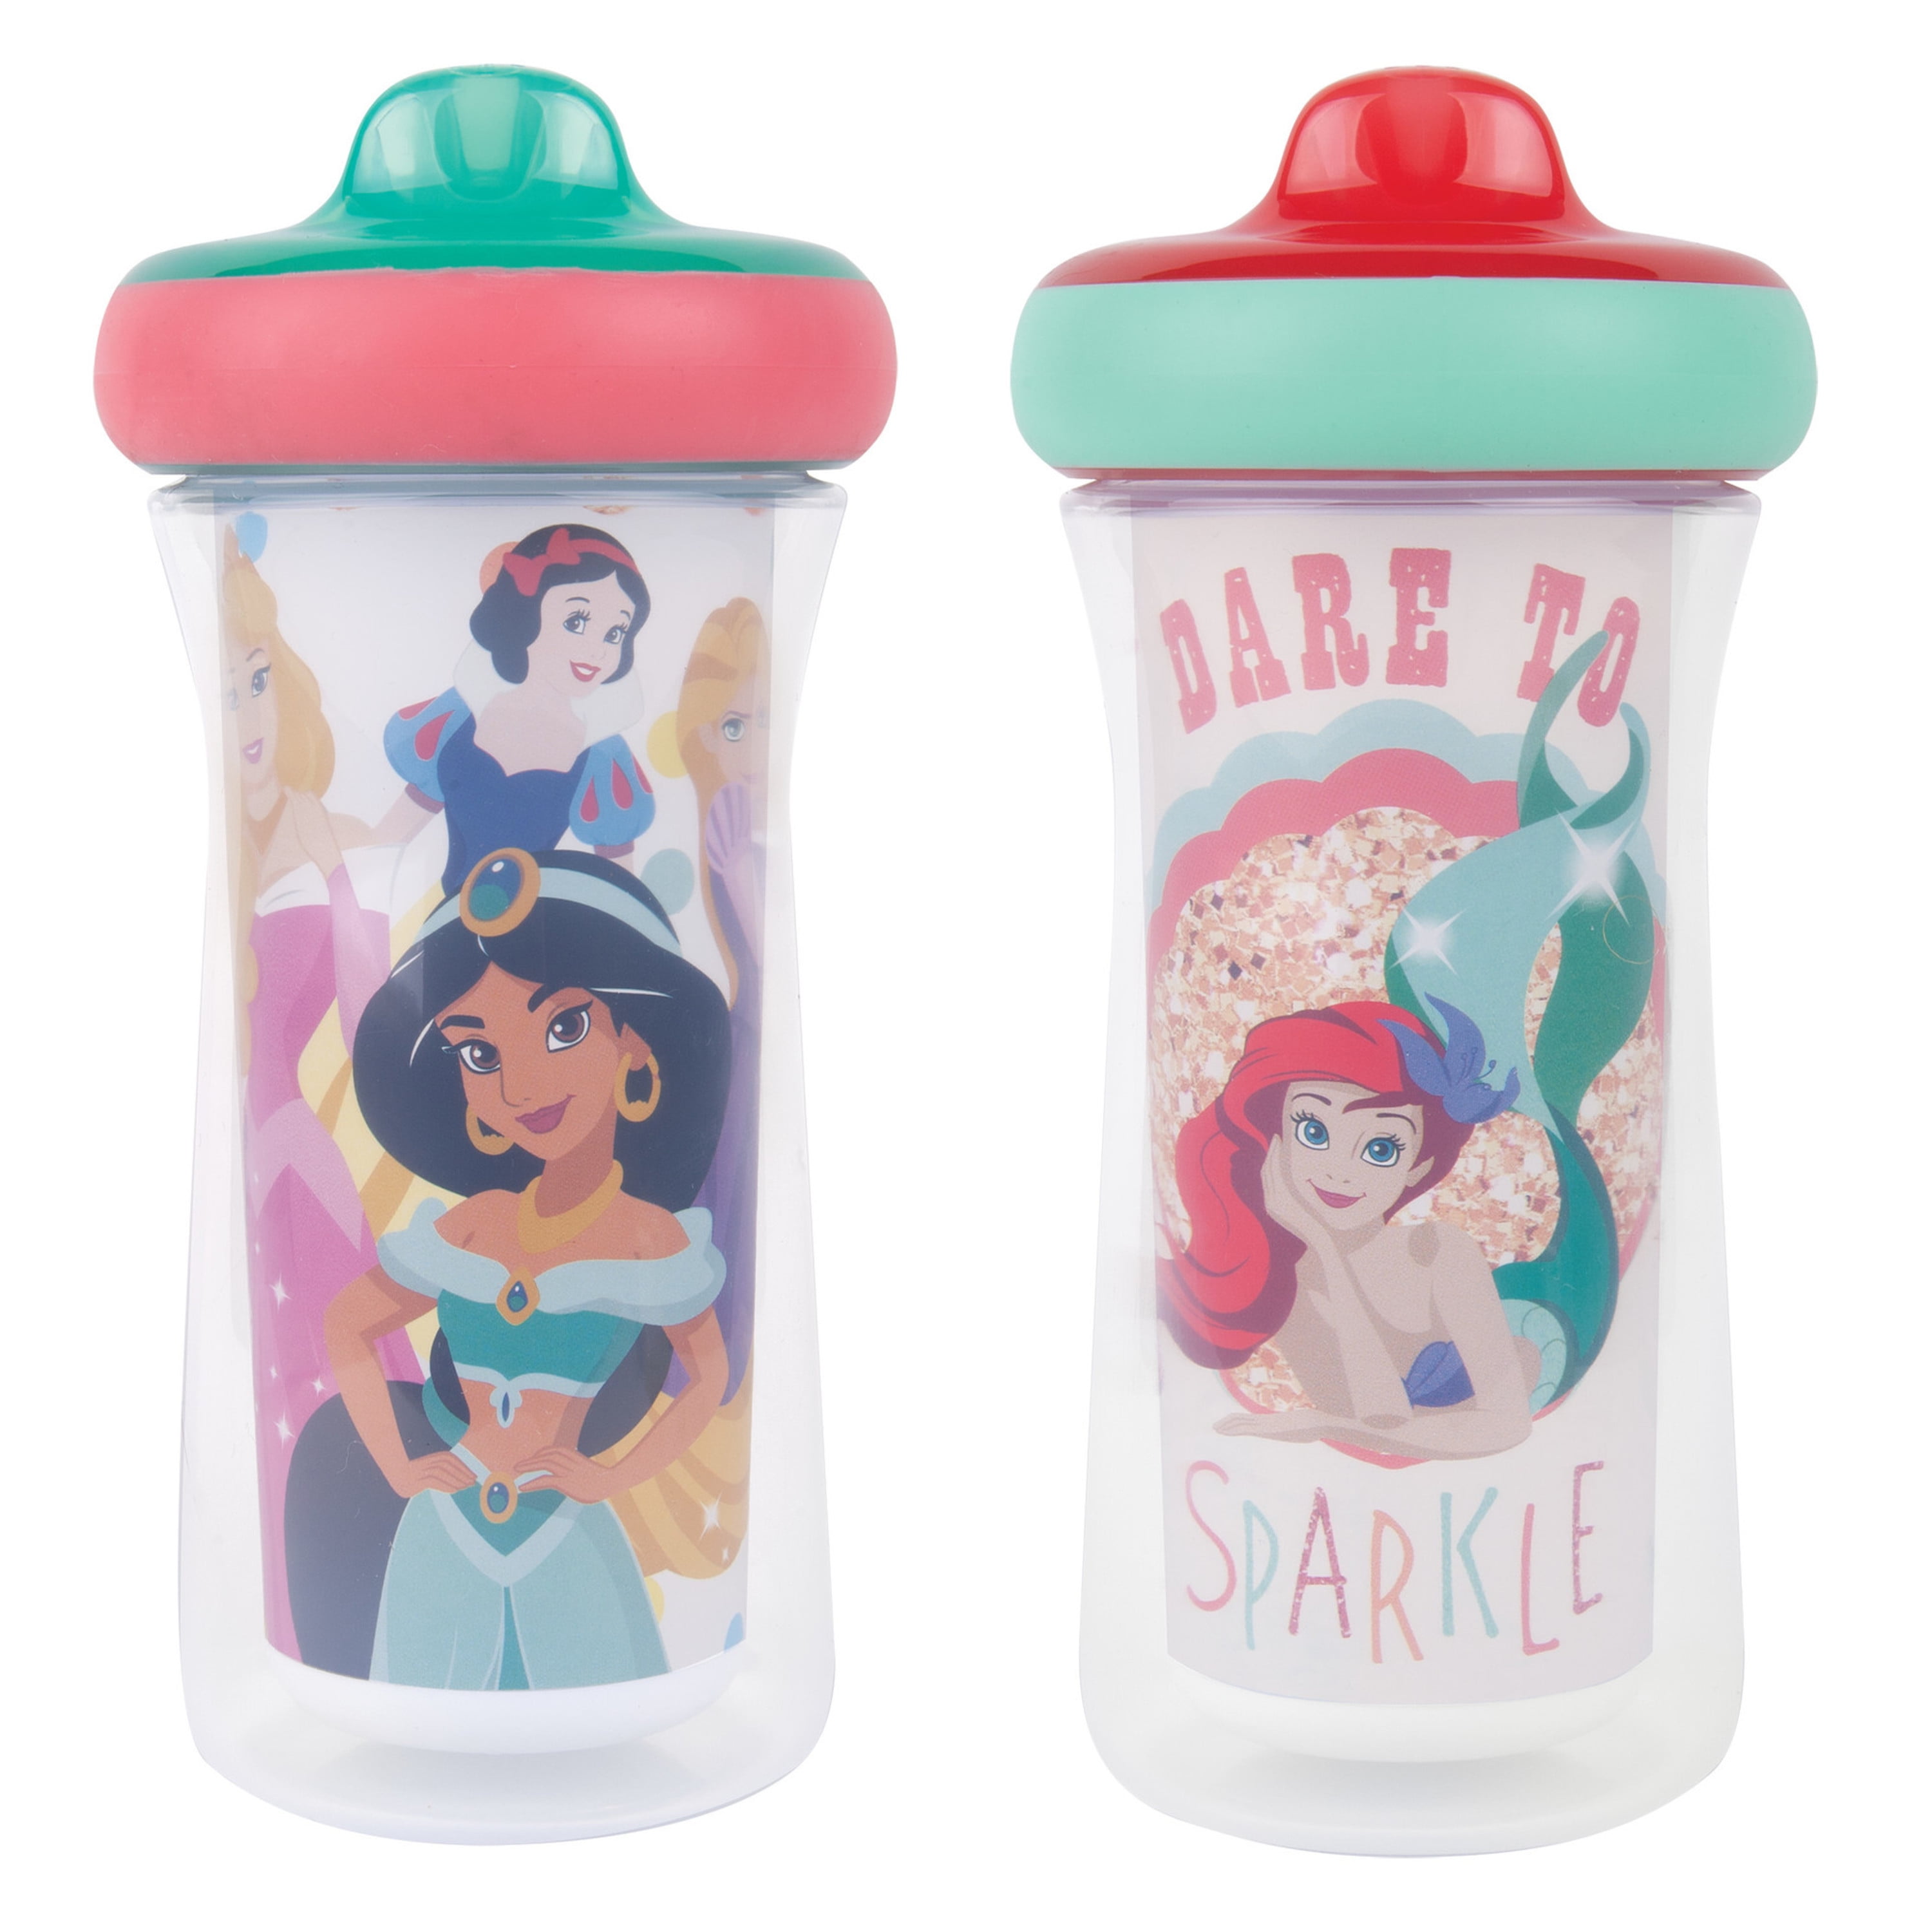 The First Years Disney Princess Insulated Sippy Cup 9 Oz Baby Cup 2pk 